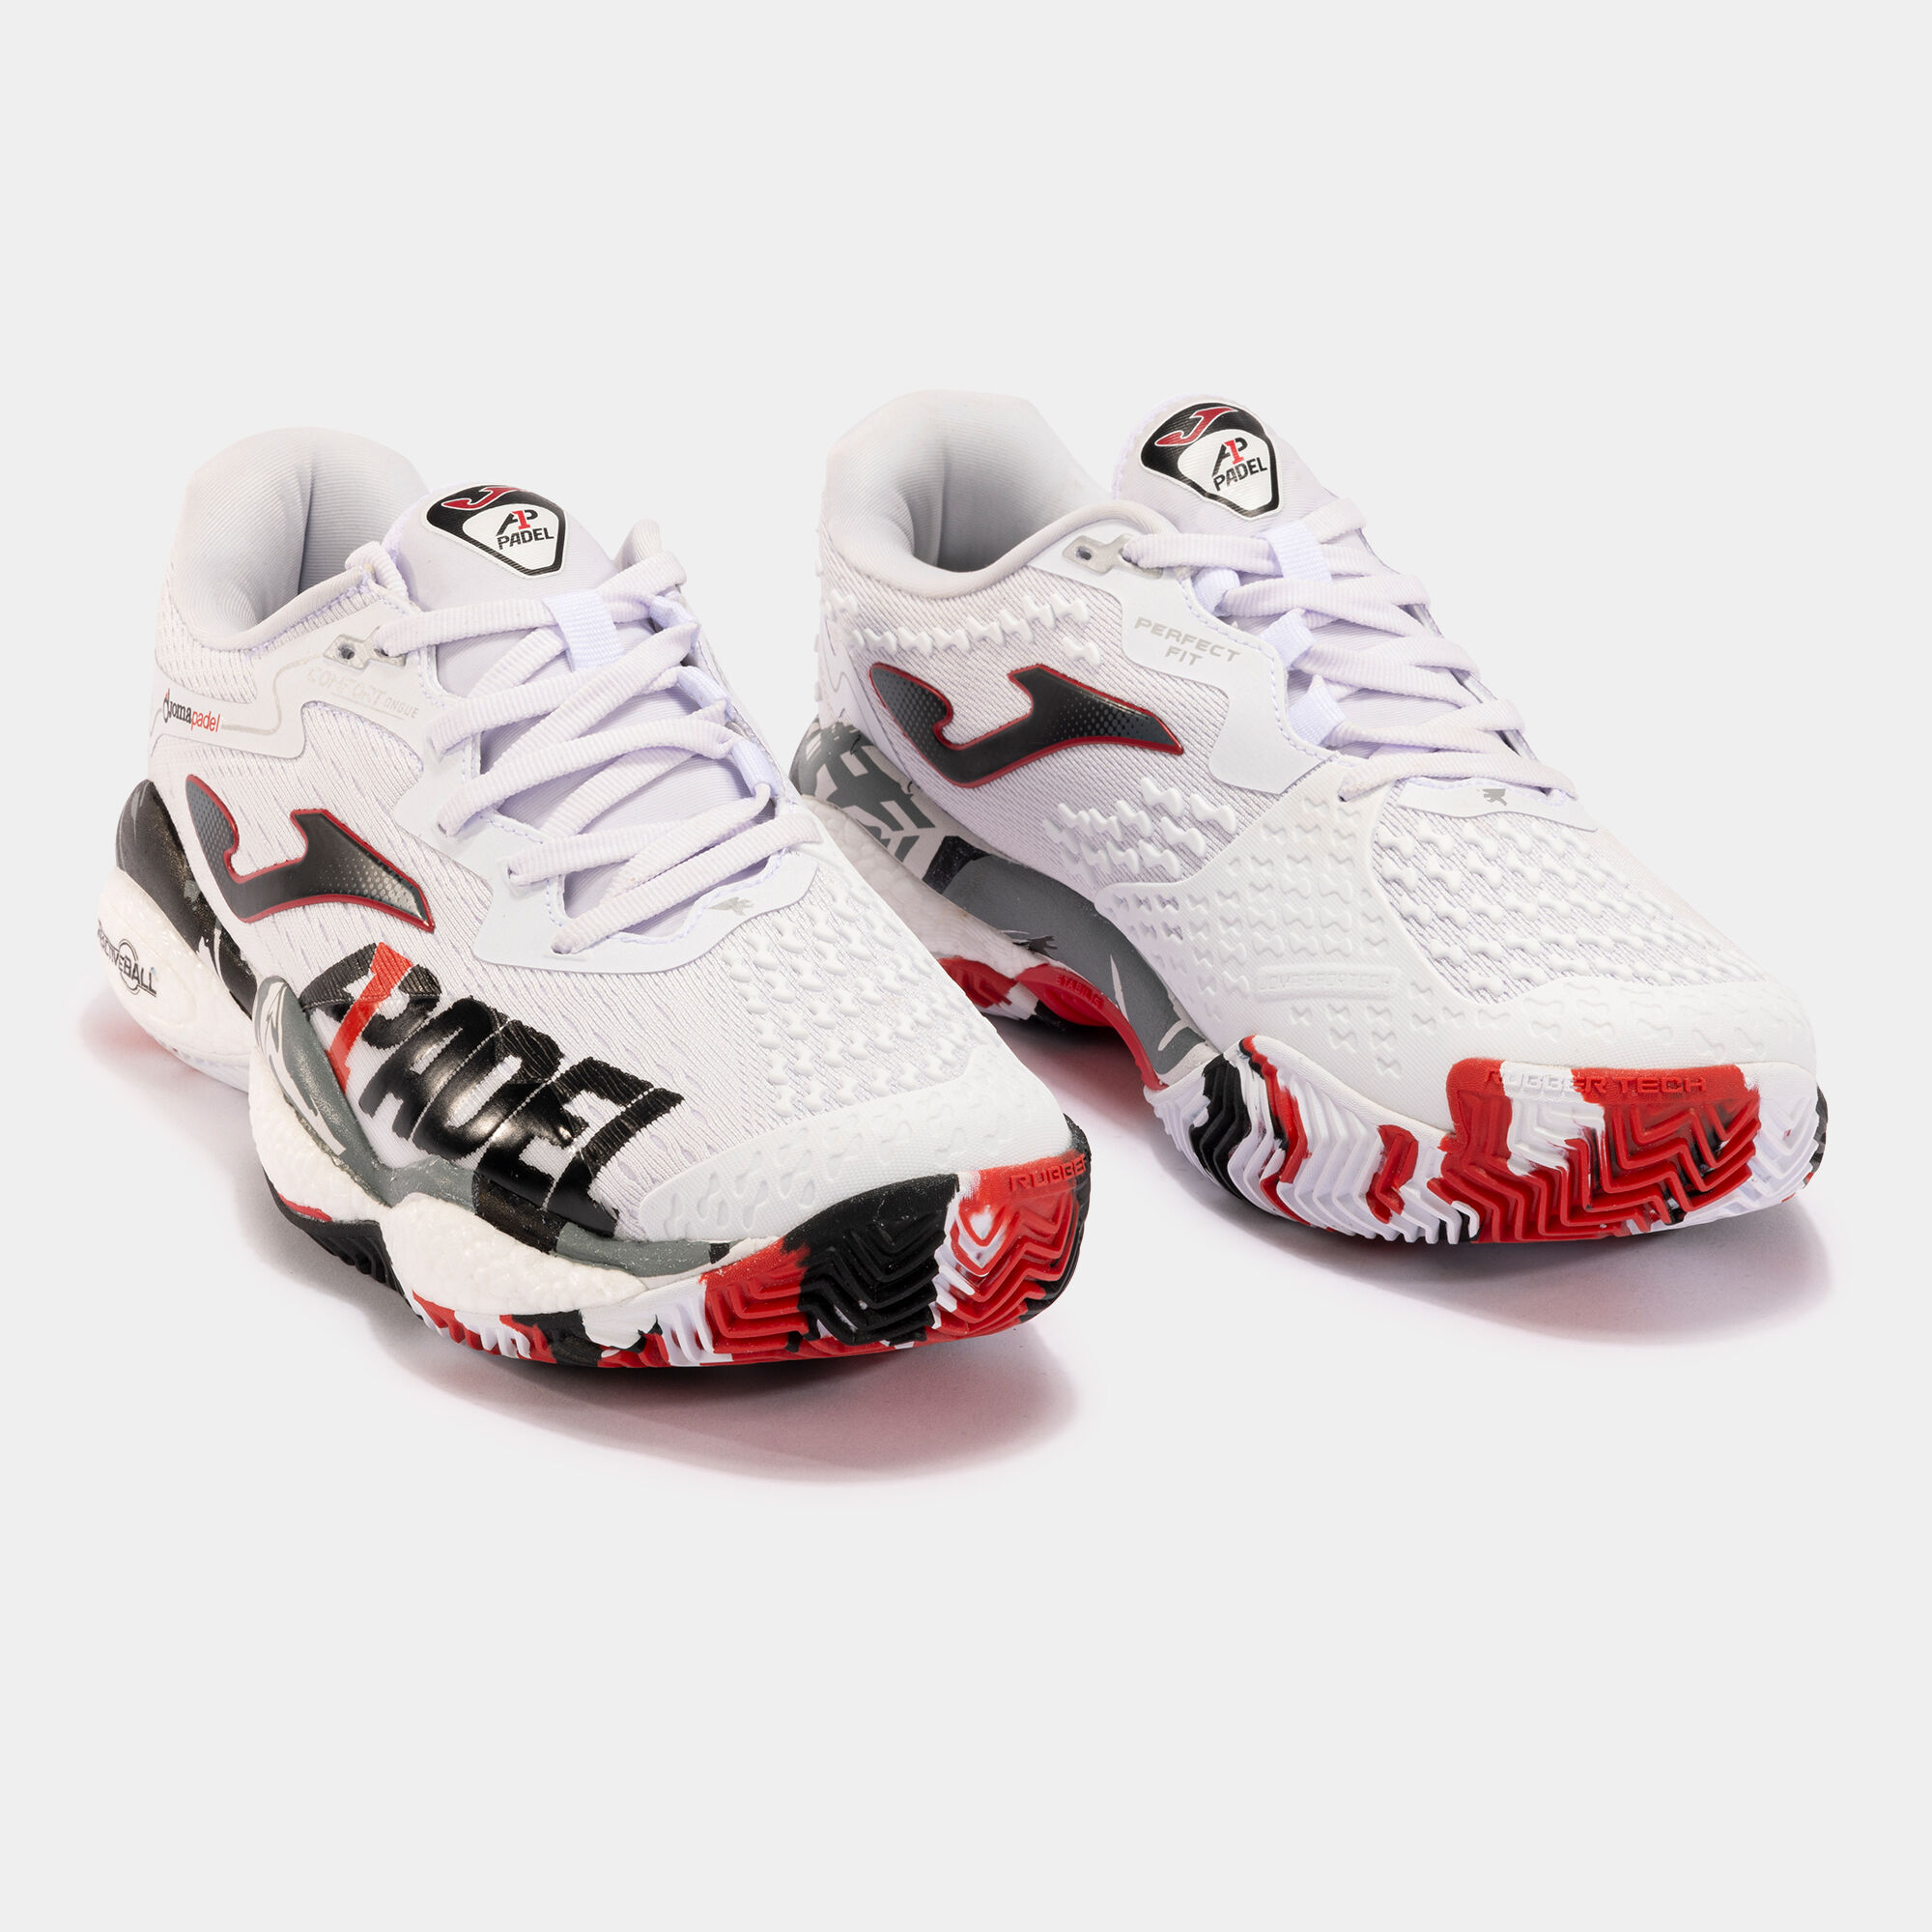 Chaussures A1 Padel terre battue unisexe blanc